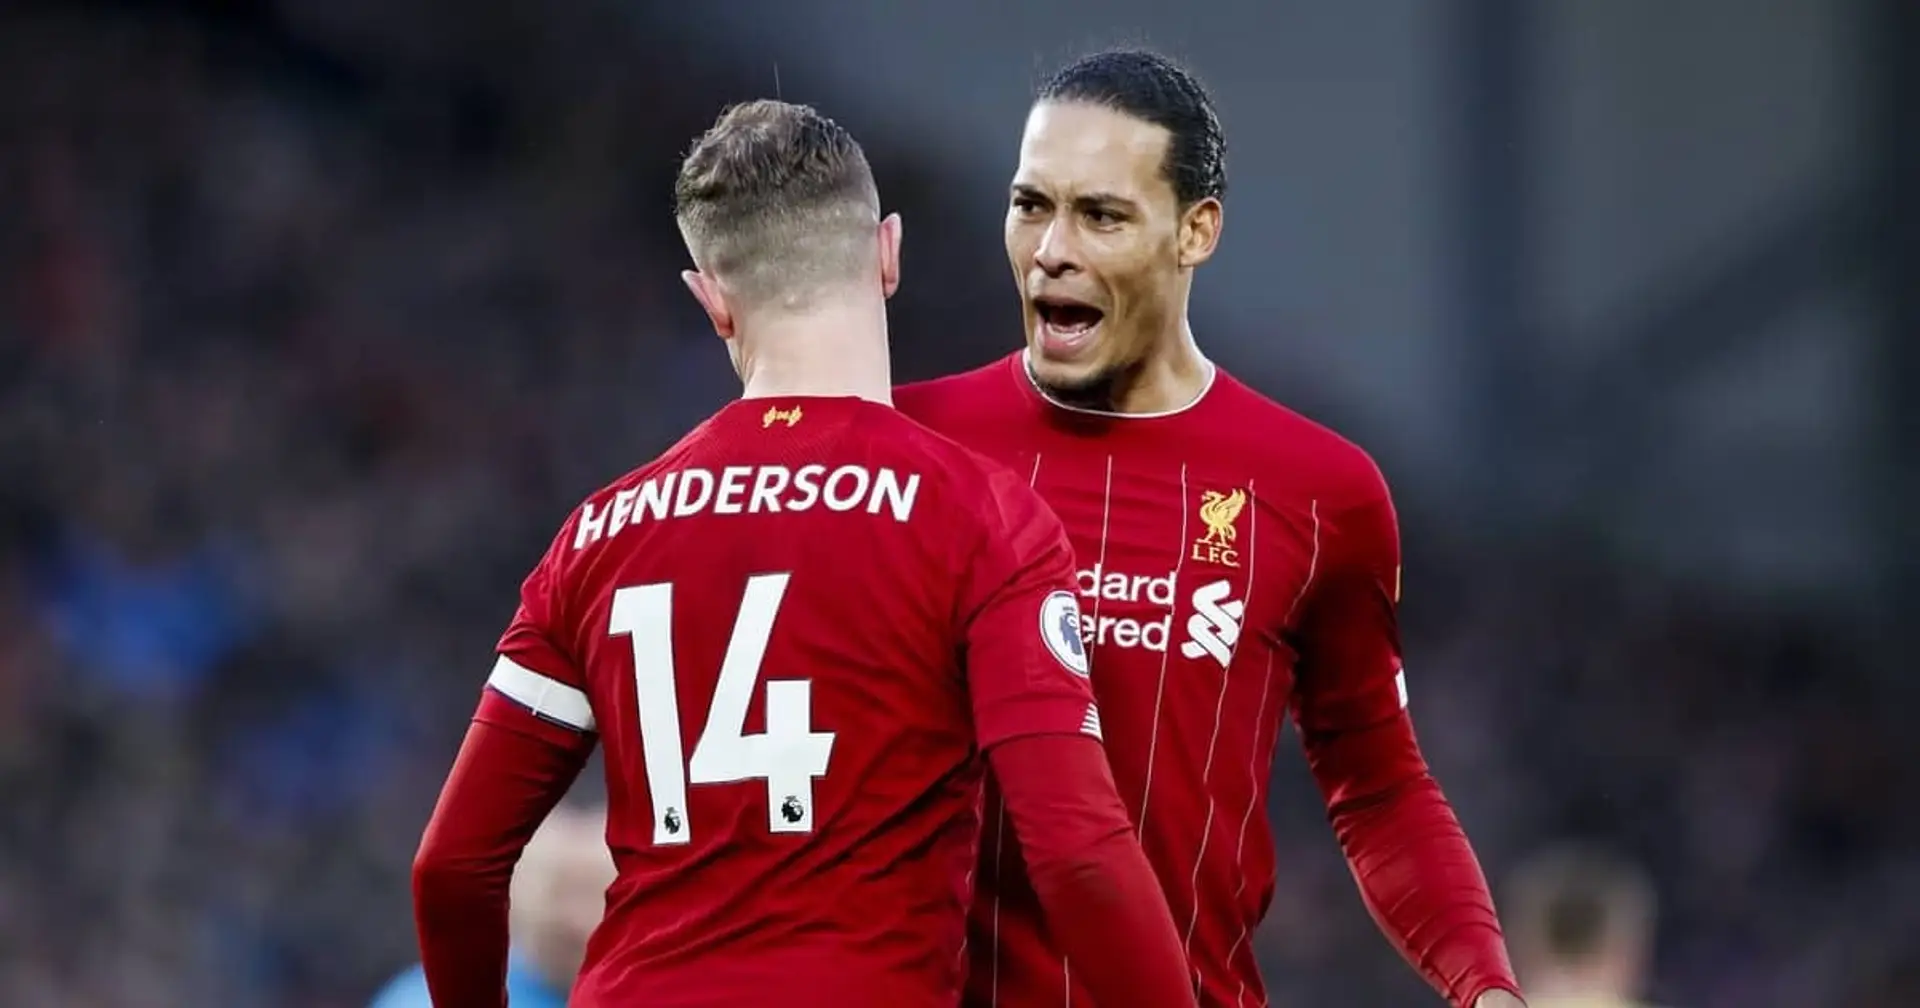 Henderson, Van Dijk, and 4 other Liverpool players to make it to Carragher and Neville's team of the year